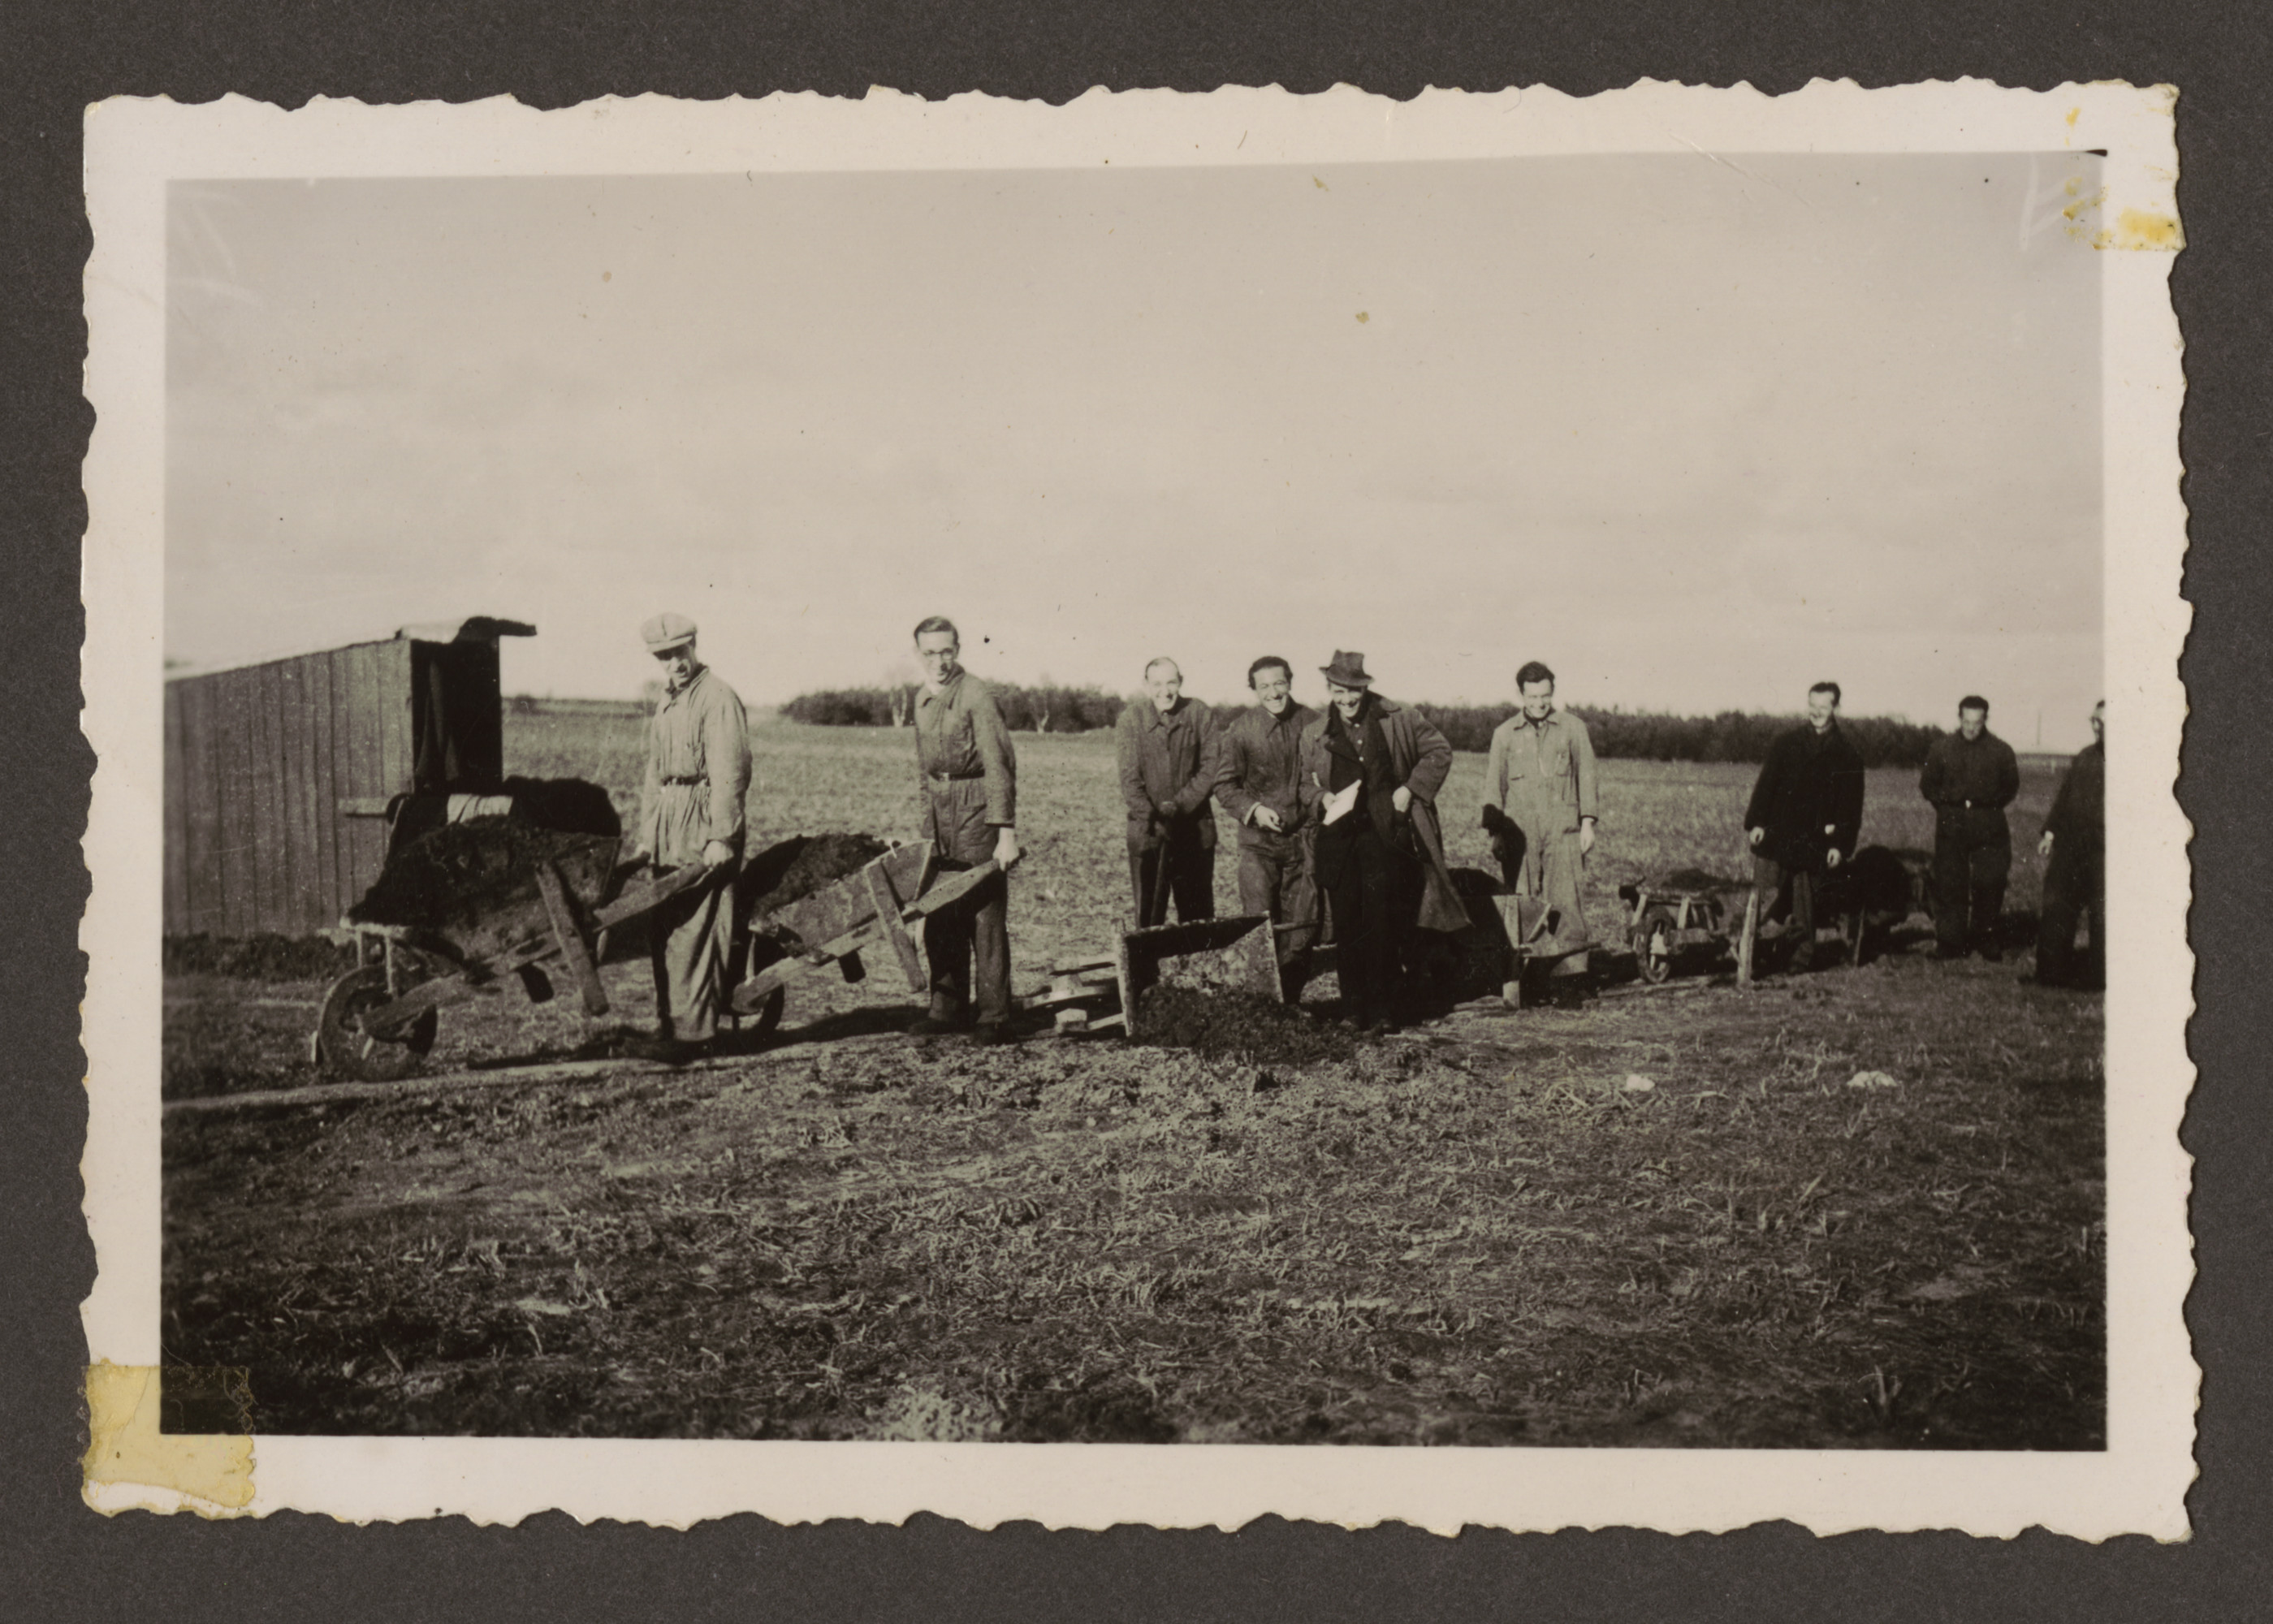 Men on a work brigade building the Westerbork transit camp.

Pictured at the far left holding a wheelbarrow  is Erich Rosendahl.